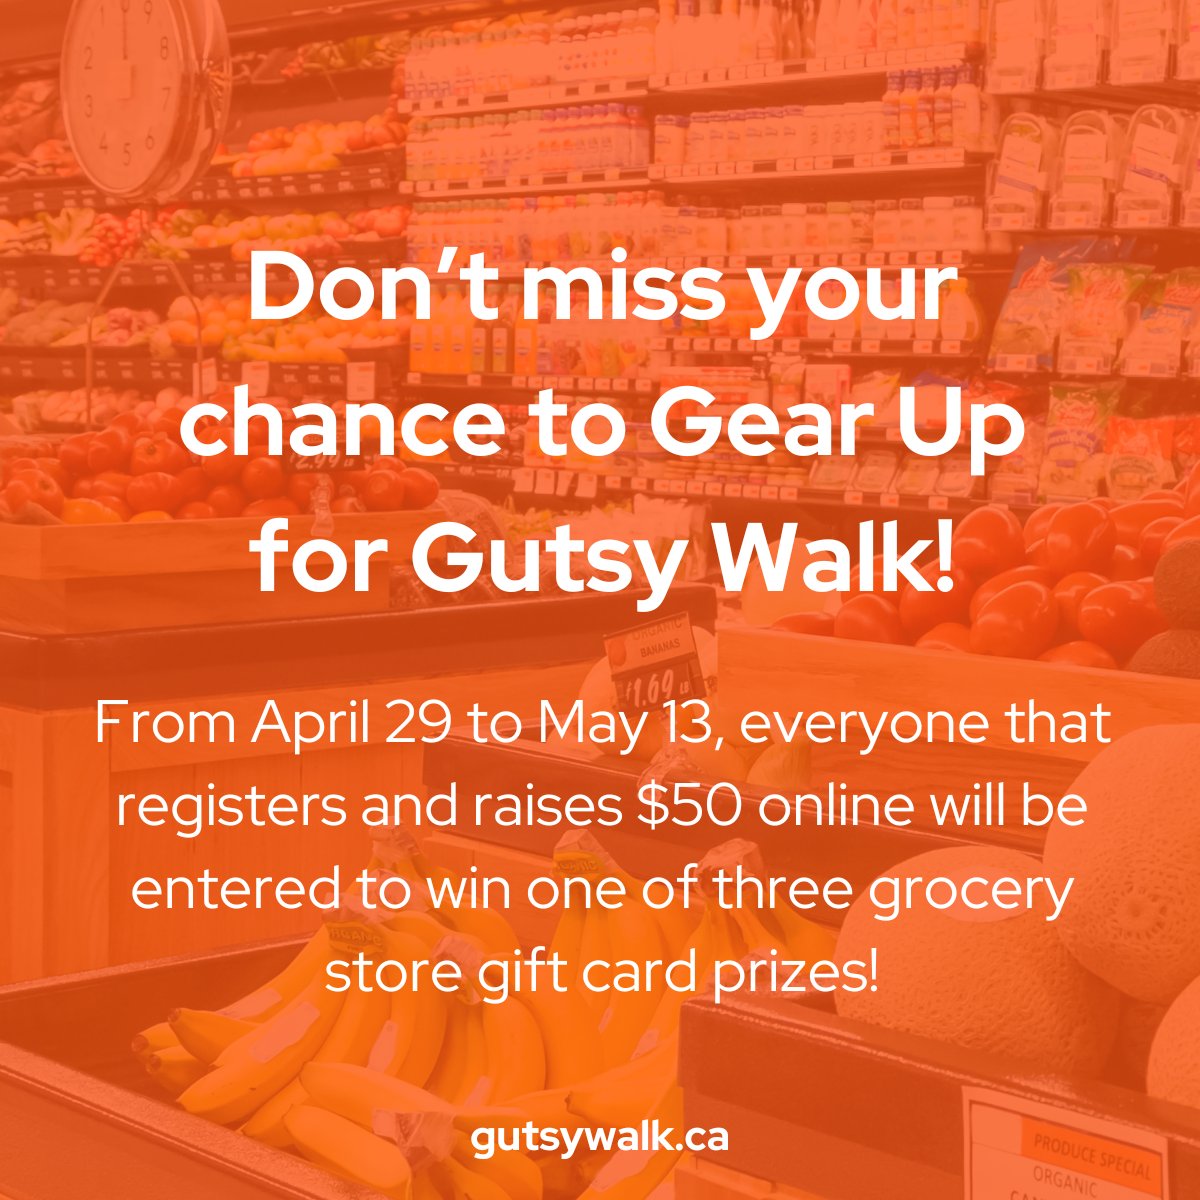 Register for #GutsyWalk and raise at least $50 online by midnight Monday to be entered to win one of three grocery store gift cards prizes! Plus: for every $50 additional raised, you earn another entry! Don’t miss the chance to get some free groceries: gutsywalk.ca